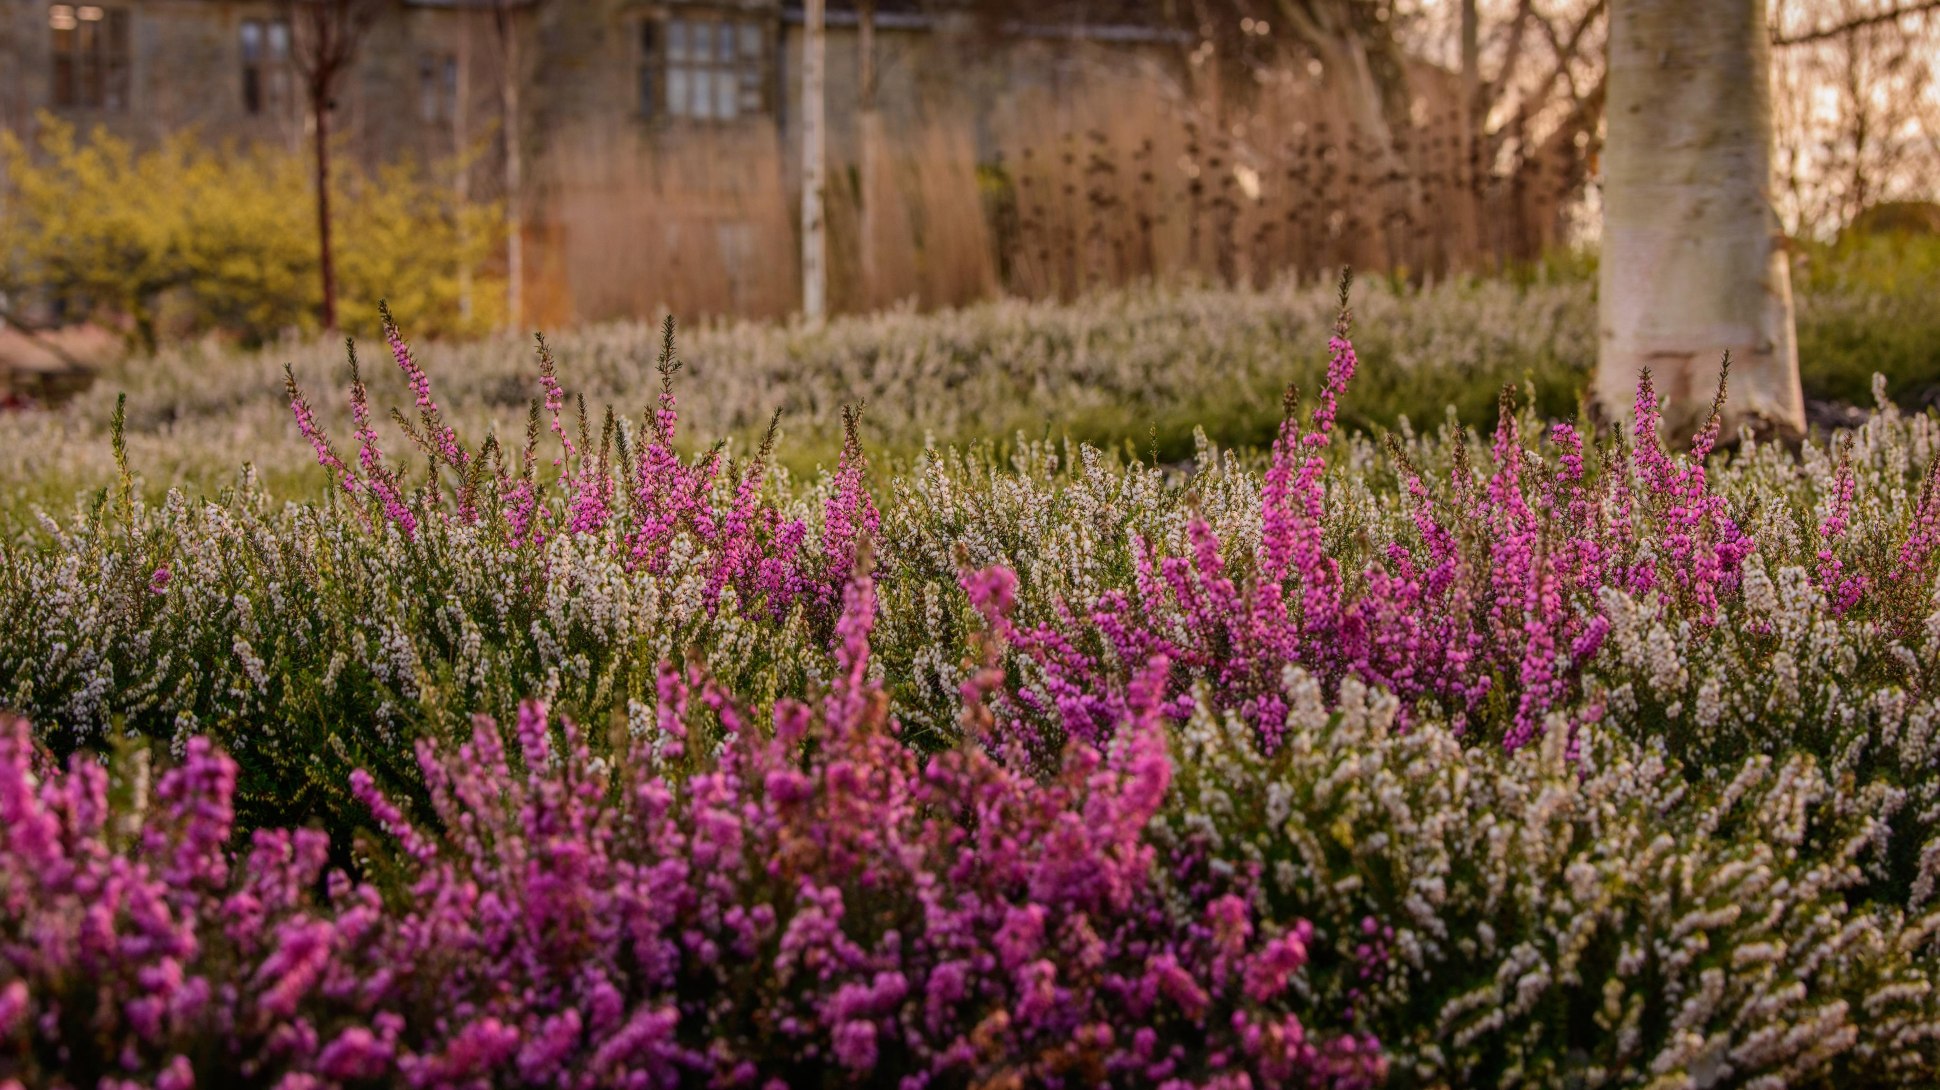 Purple and white heather flowers in the Winter Garden